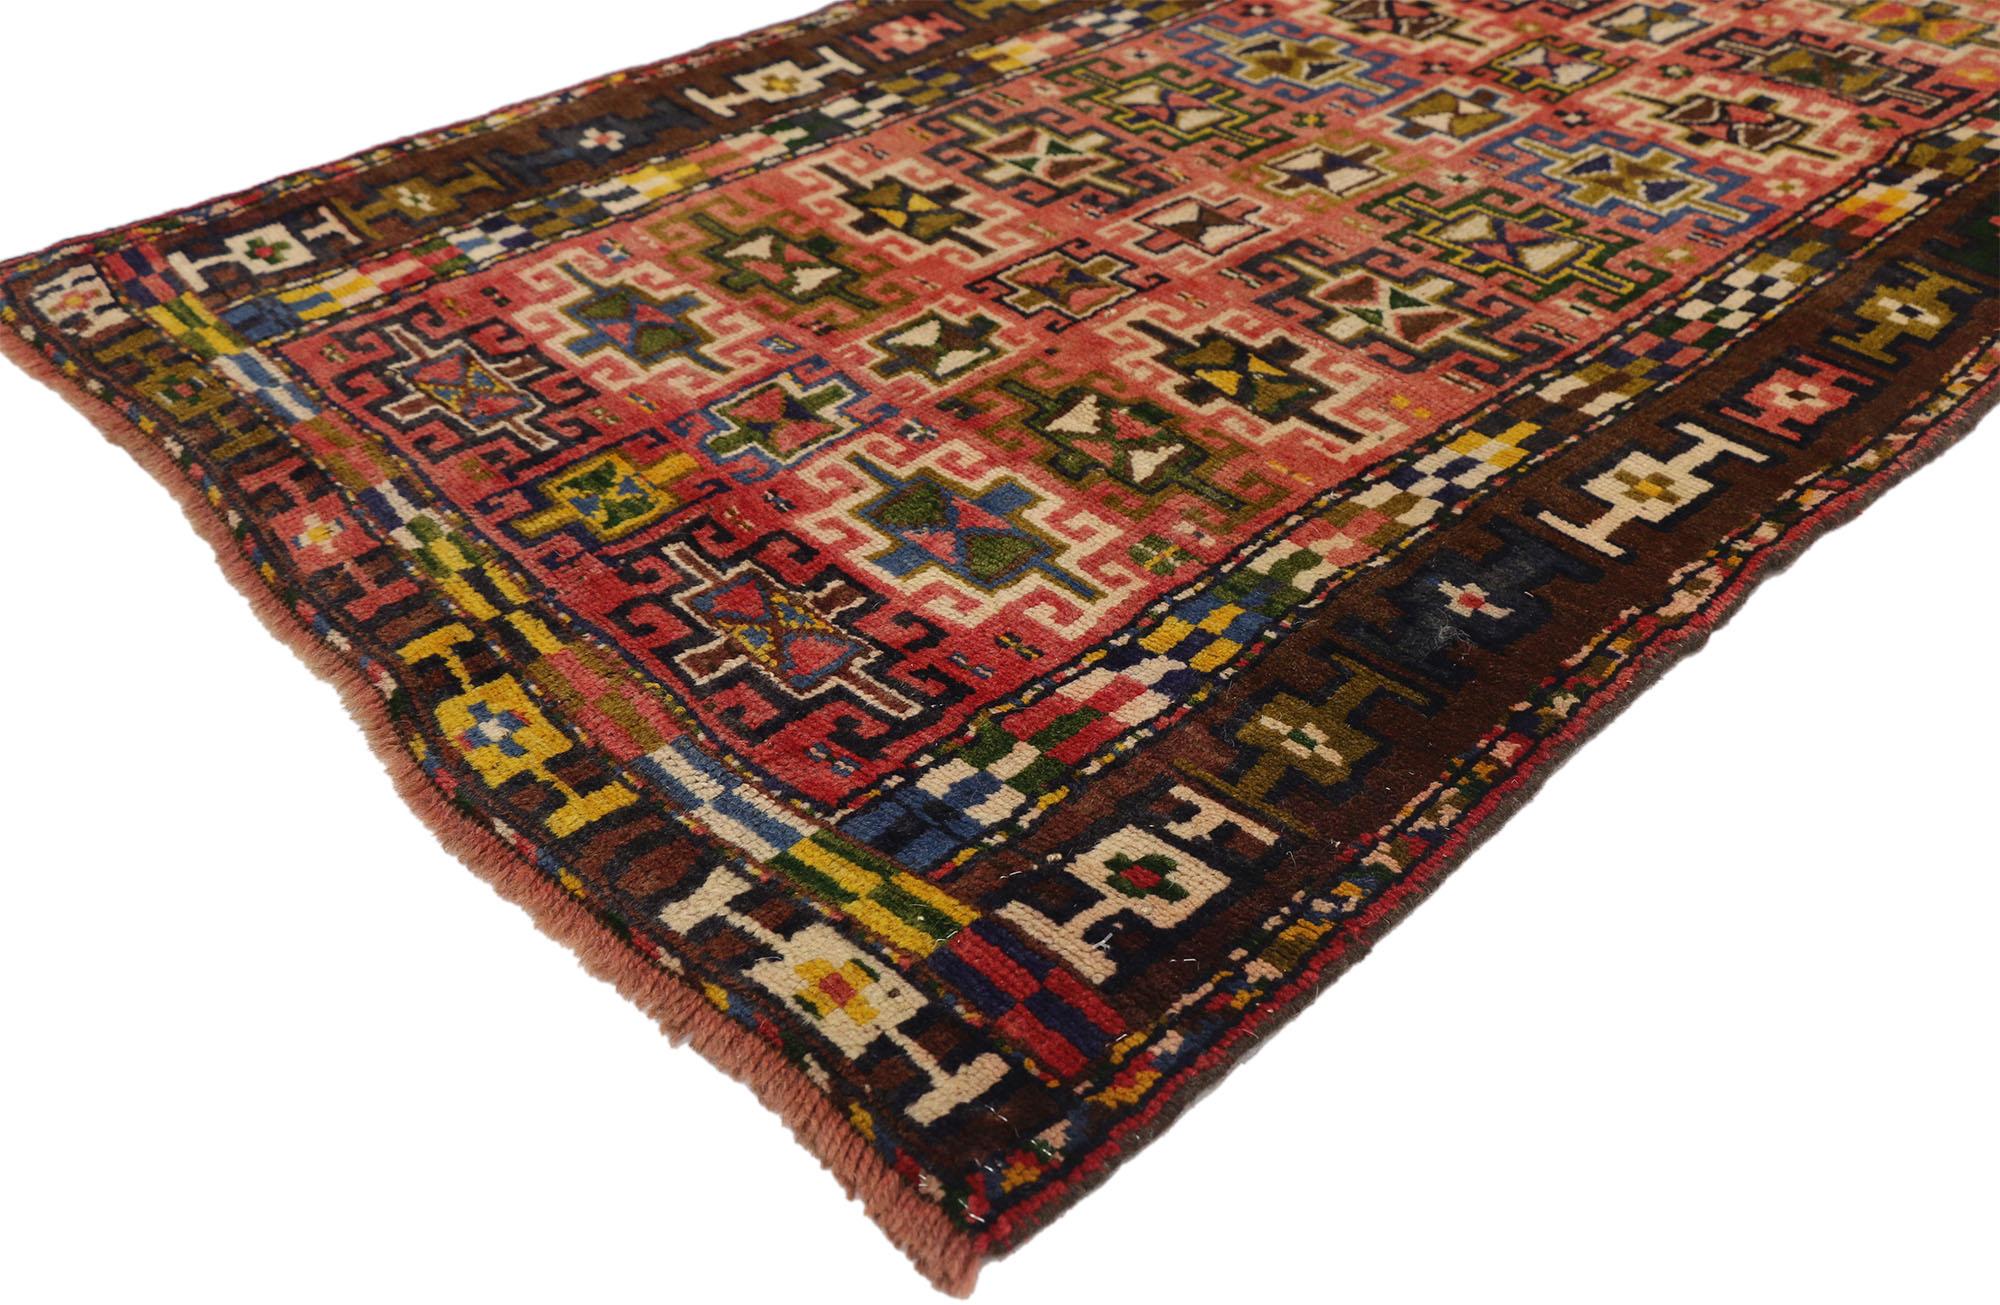 76221 Vintage Persian Azerbaijan Carpet Runner with Modern Tribal Style, Azeri Rug. This vintage Persian Azerbaijan carpet runner highlights Modern Tribal Style. Features an all-over repeating pattern of geometric motifs in an abrashed field of